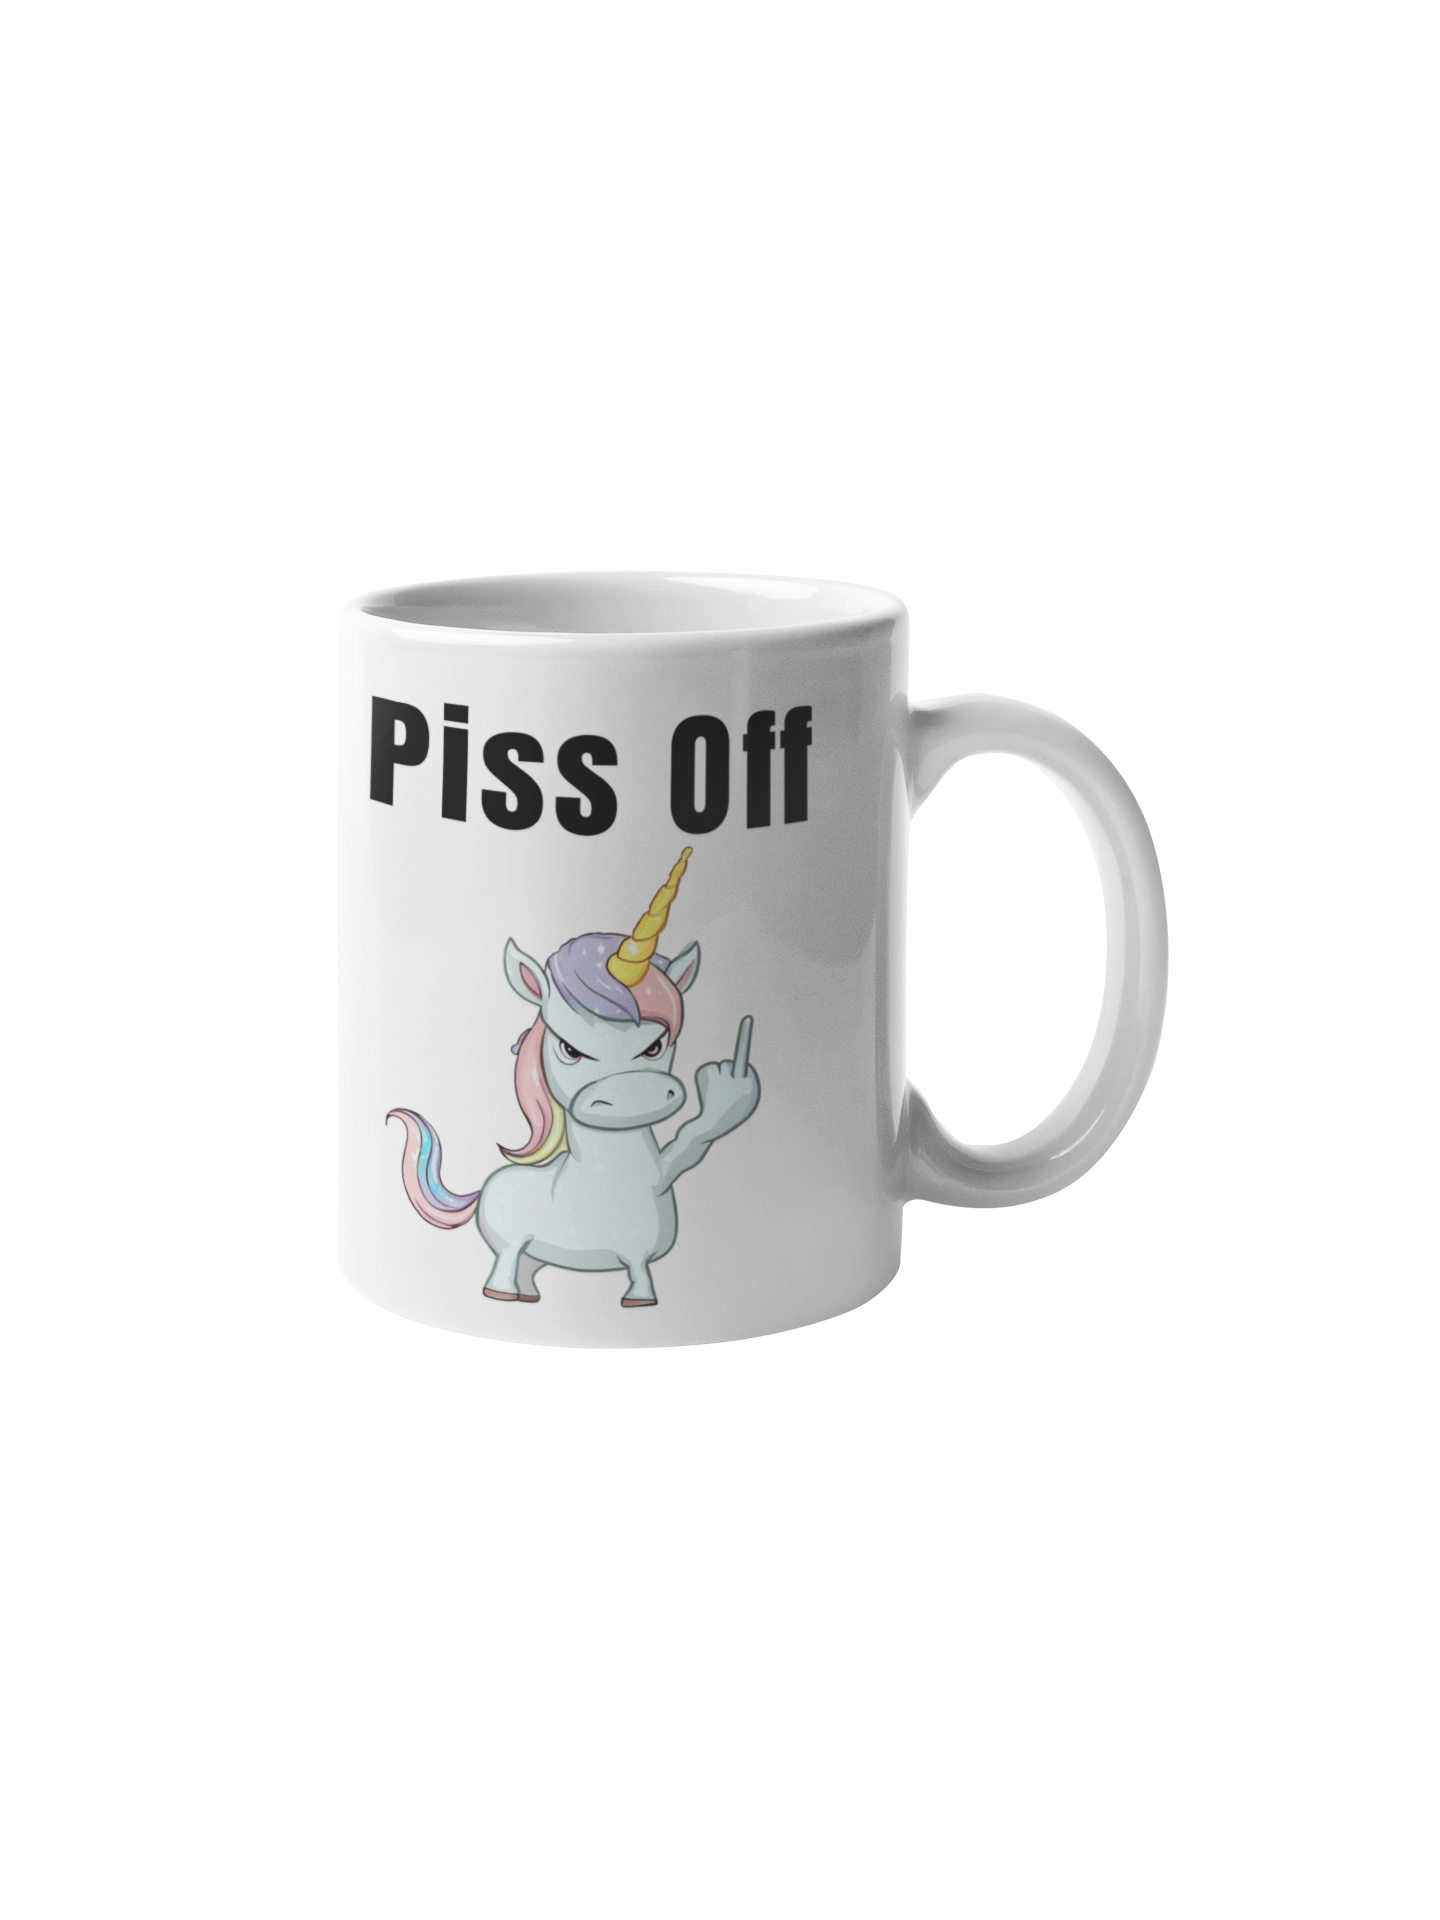 Piss Off- White glossy mug adulting birthday gift boyfriend gift Christmas gift co-worker gift coffee mug coworker gift dads day gift fiance gift funny mug gift for boyfriend gift for dad gift for grandpa gift for her gift for him gift for husband gift for mom gift for sister gift for wife gift idea girlfriend gift Husband Gift moms gift mothers day gift school gift teacher gift unicorn Unique gift wife gift